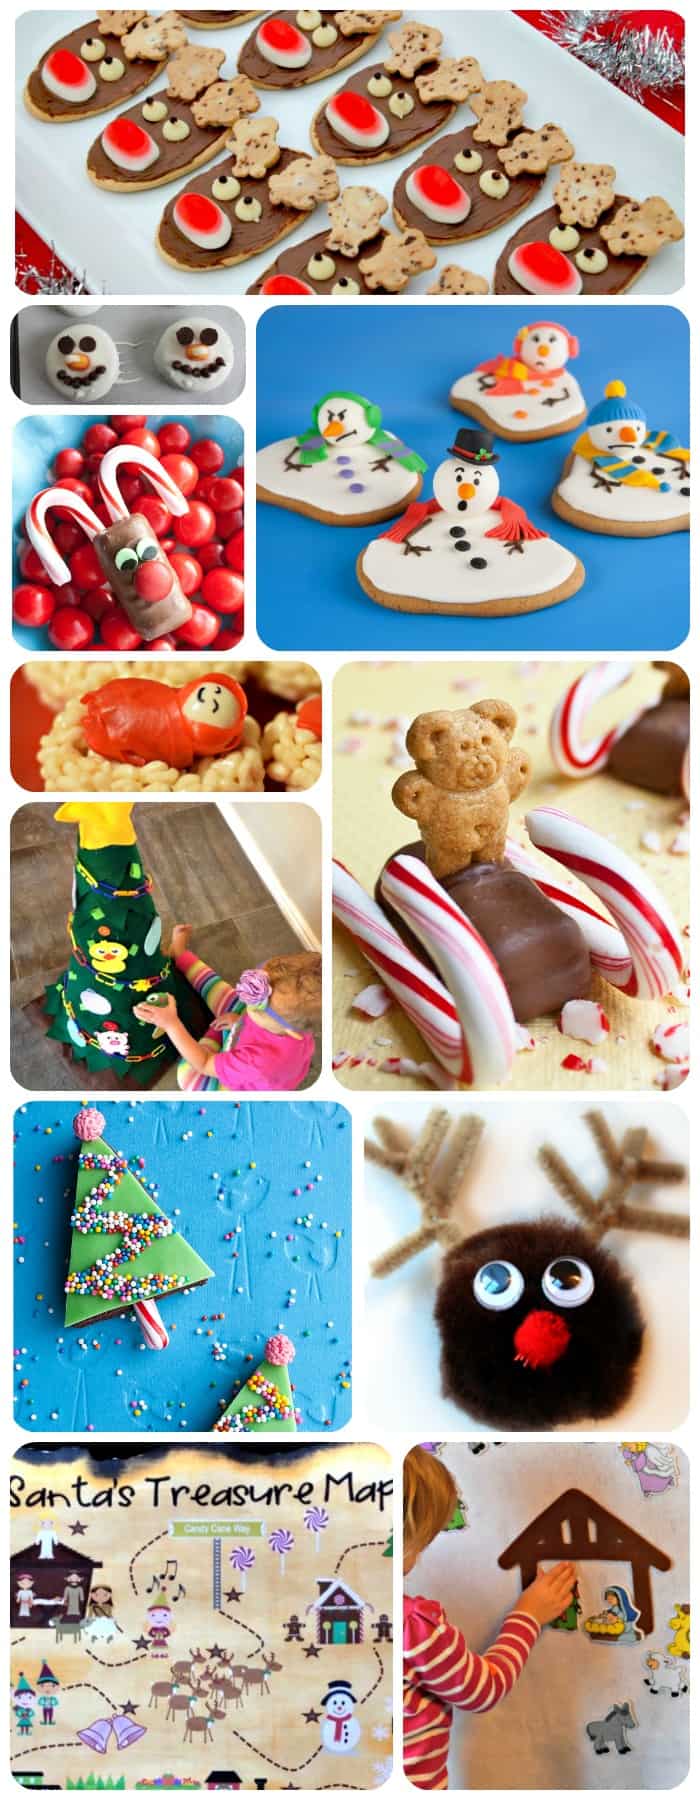 TONS of ideas for the KIDS this holiday season! Fun Christmas crafts and treats!